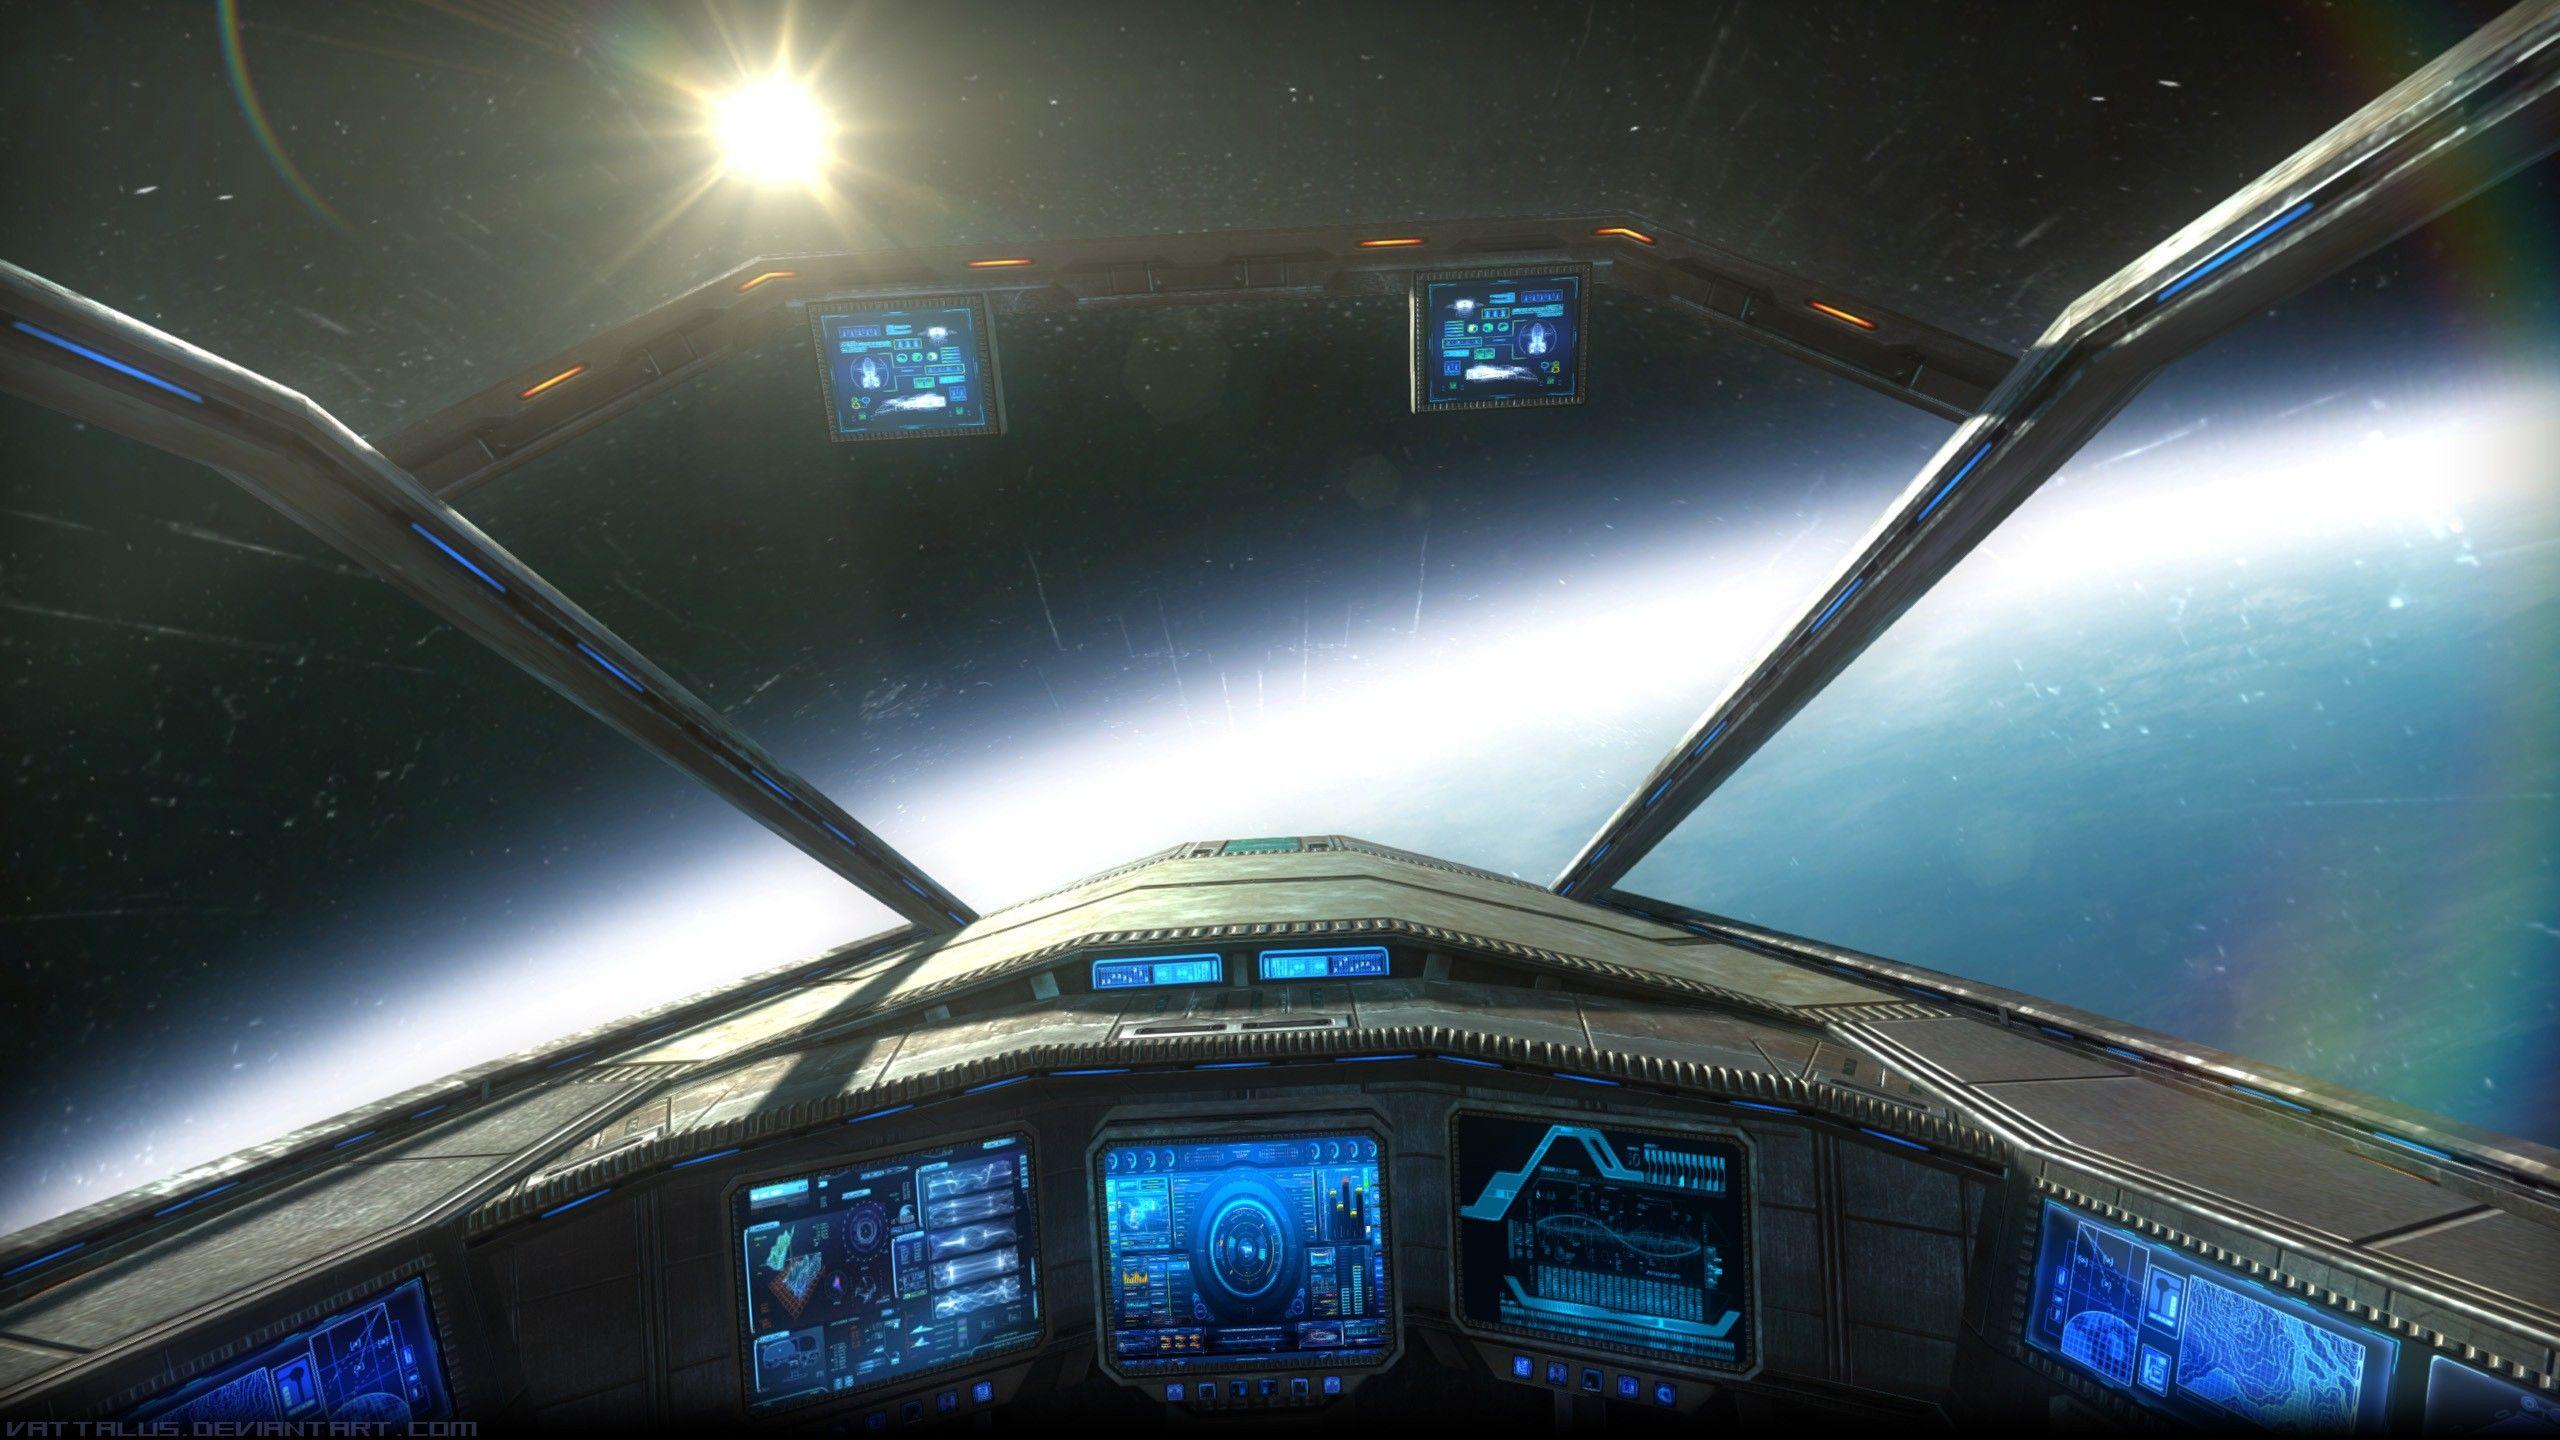 Cockpit View Space Fighter Jet. Awesome Desktop HD Wallpaper